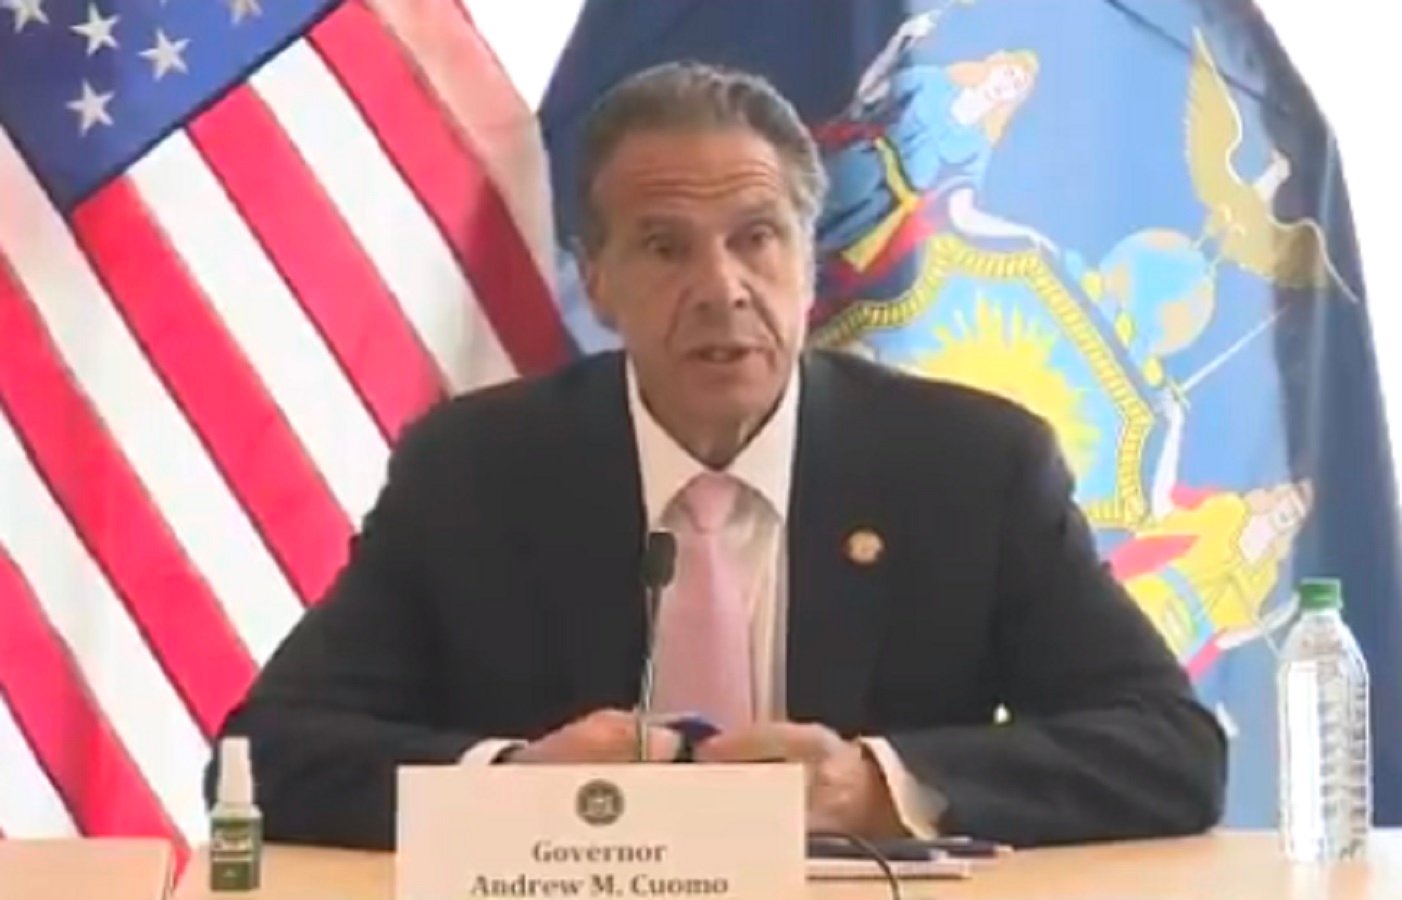 WATCH: Cuomo Asked About How He ‘Profited Off The Backs Of Dead New Yorkers’